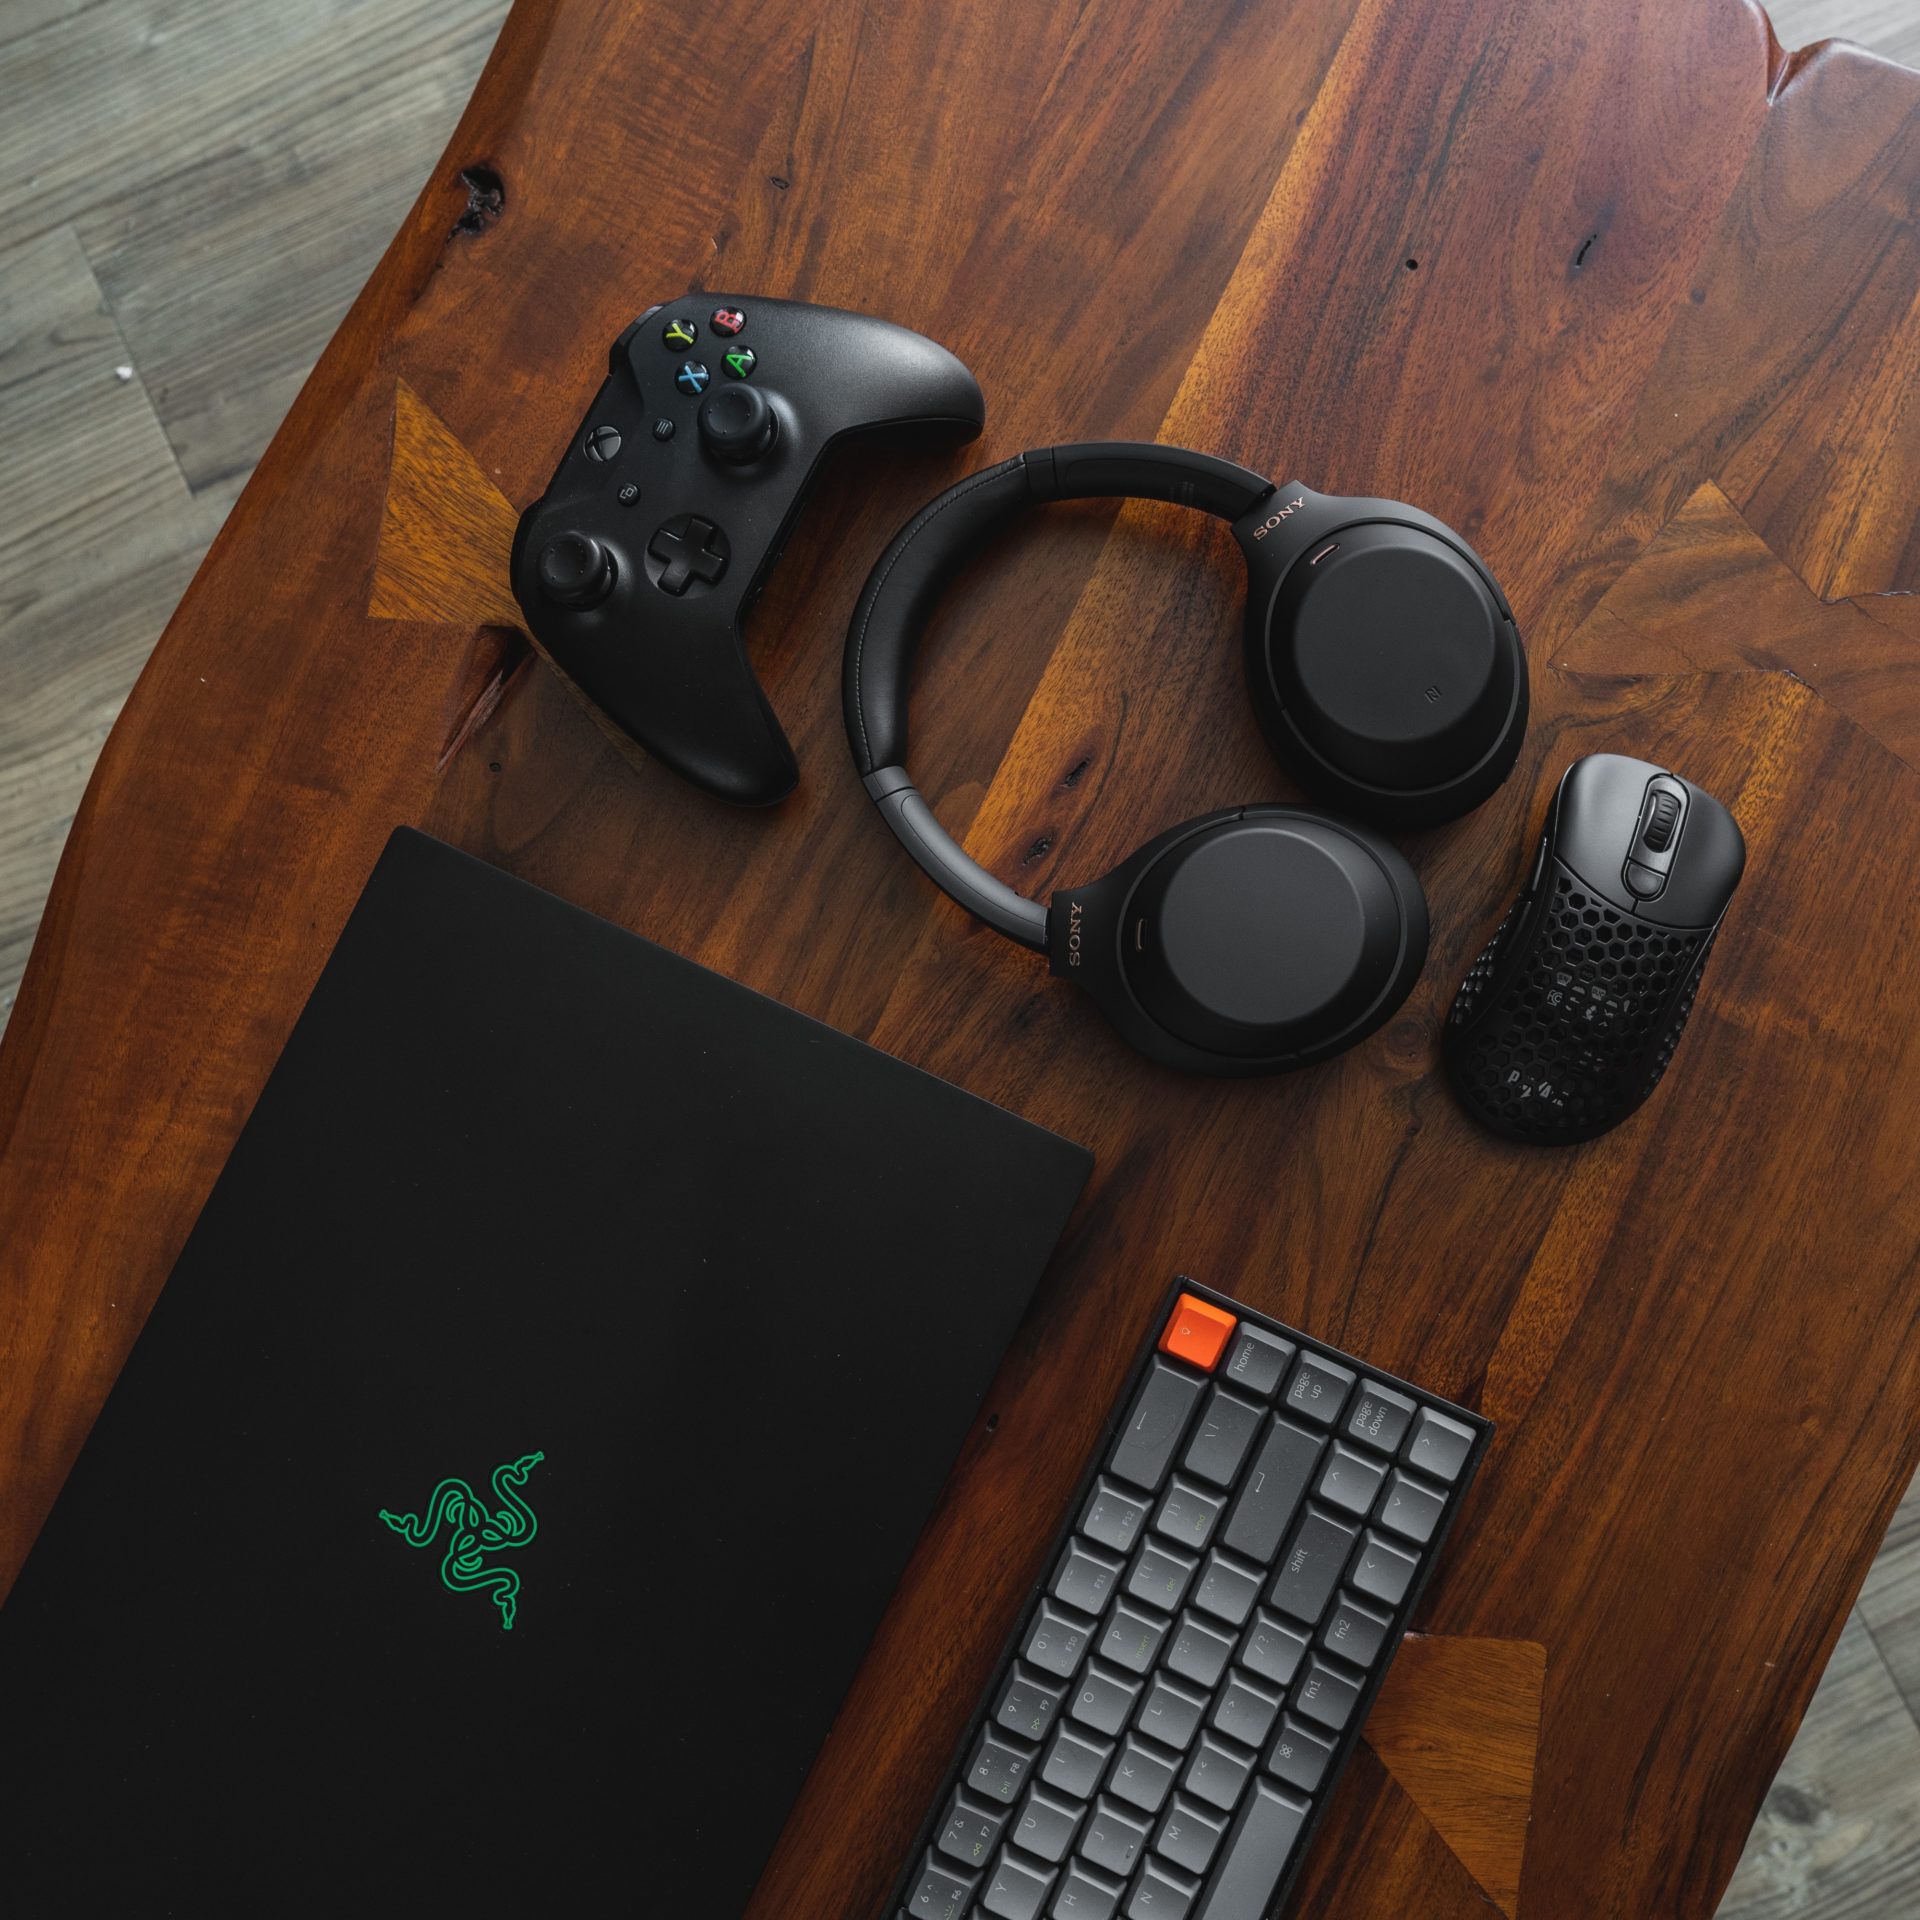 Gaming gear on a wooden table